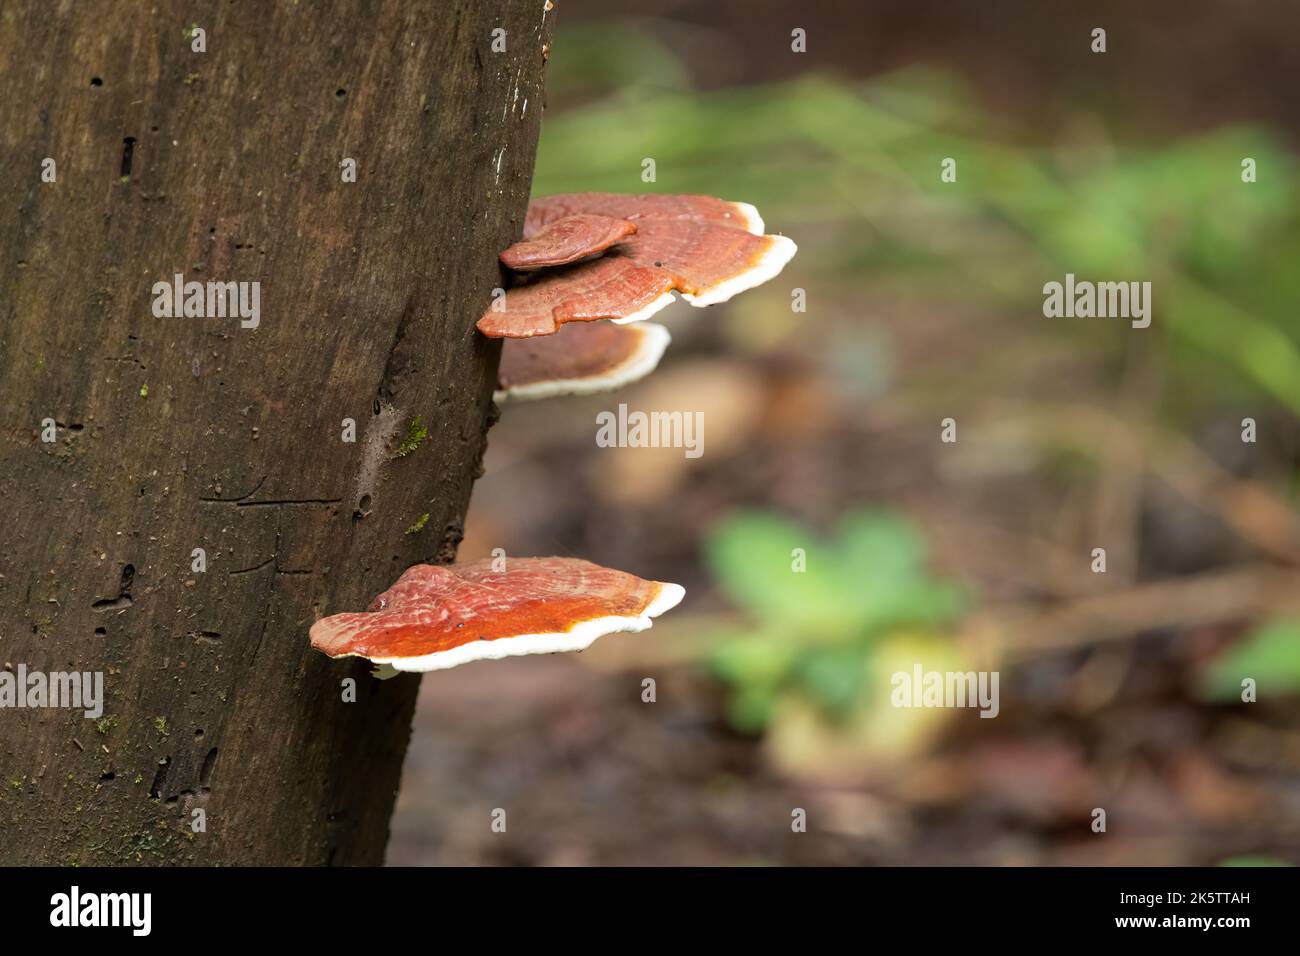 Wild mushrooms, Ganoderma lucidum growing on the side of a tree trunk in the forests of Goa in India. Stock Photo